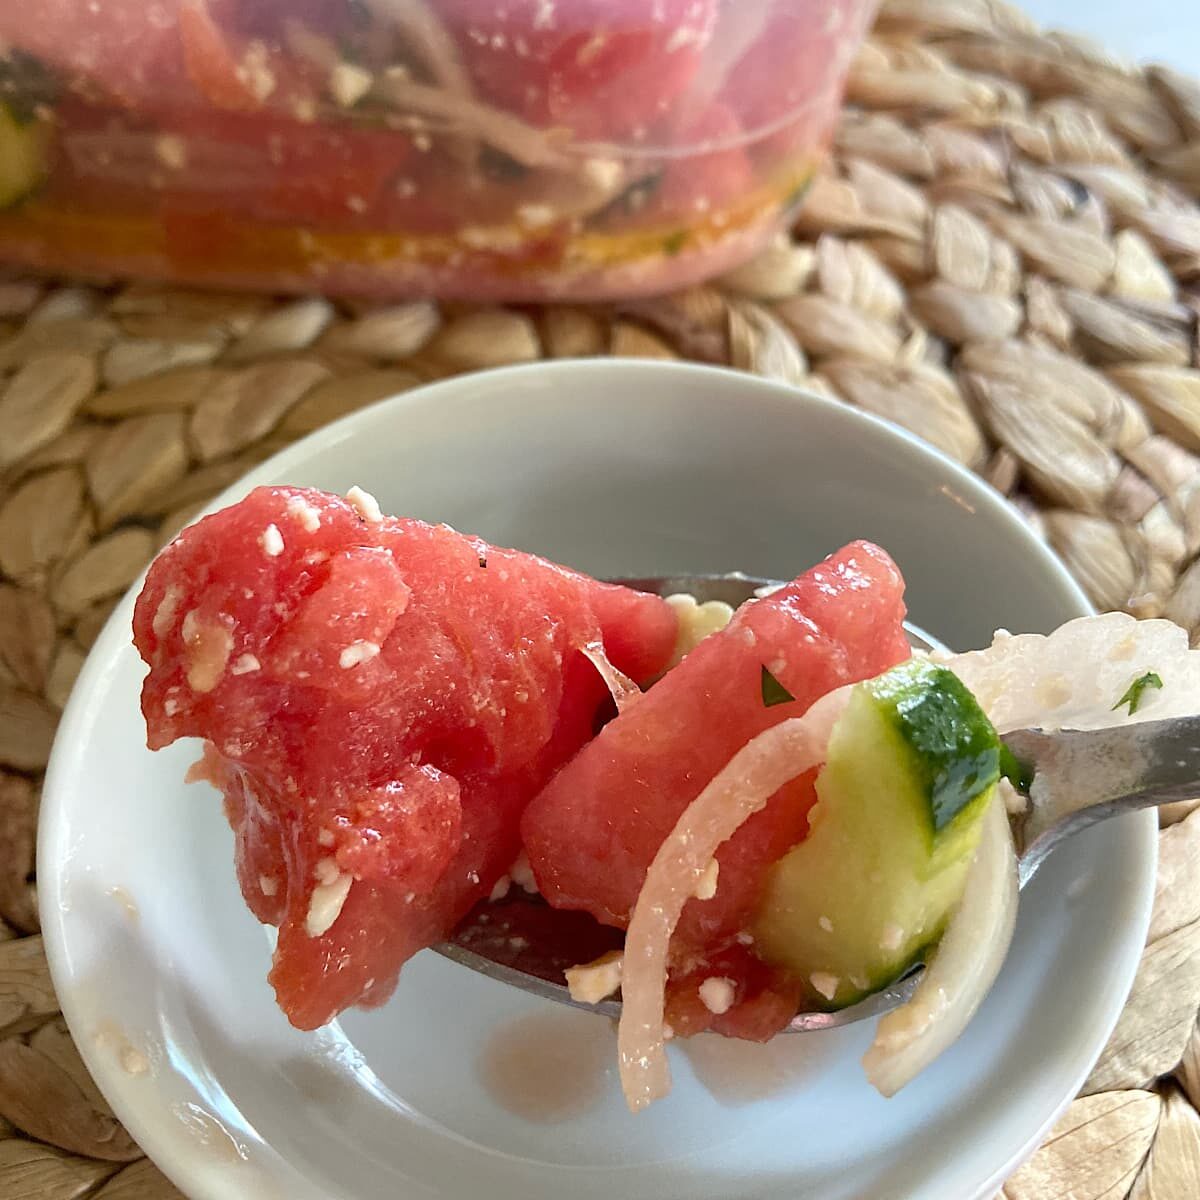 a serving of watermelon salad